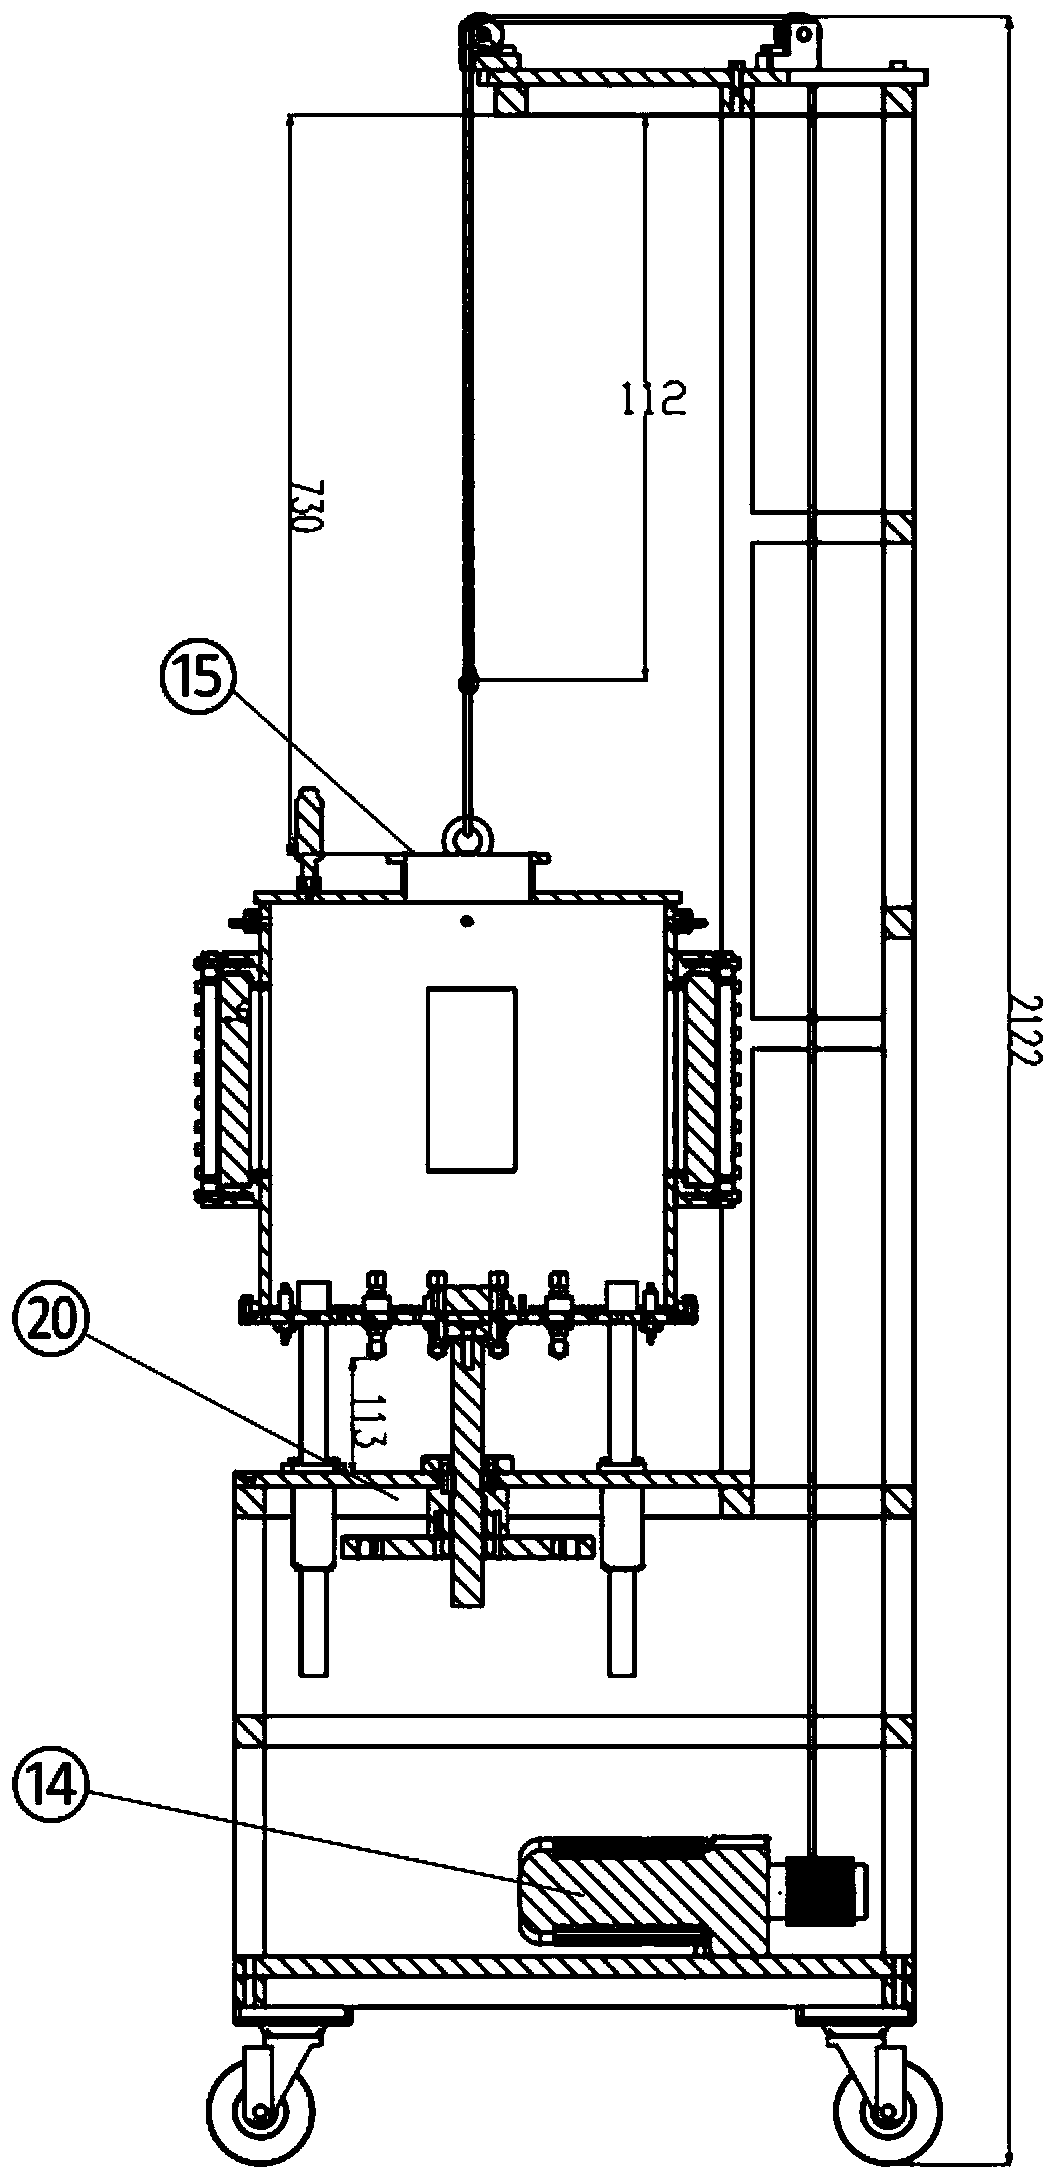 Experimental device for measuring single-oil-drop combustion temperature and flame structure under low-pressure condition